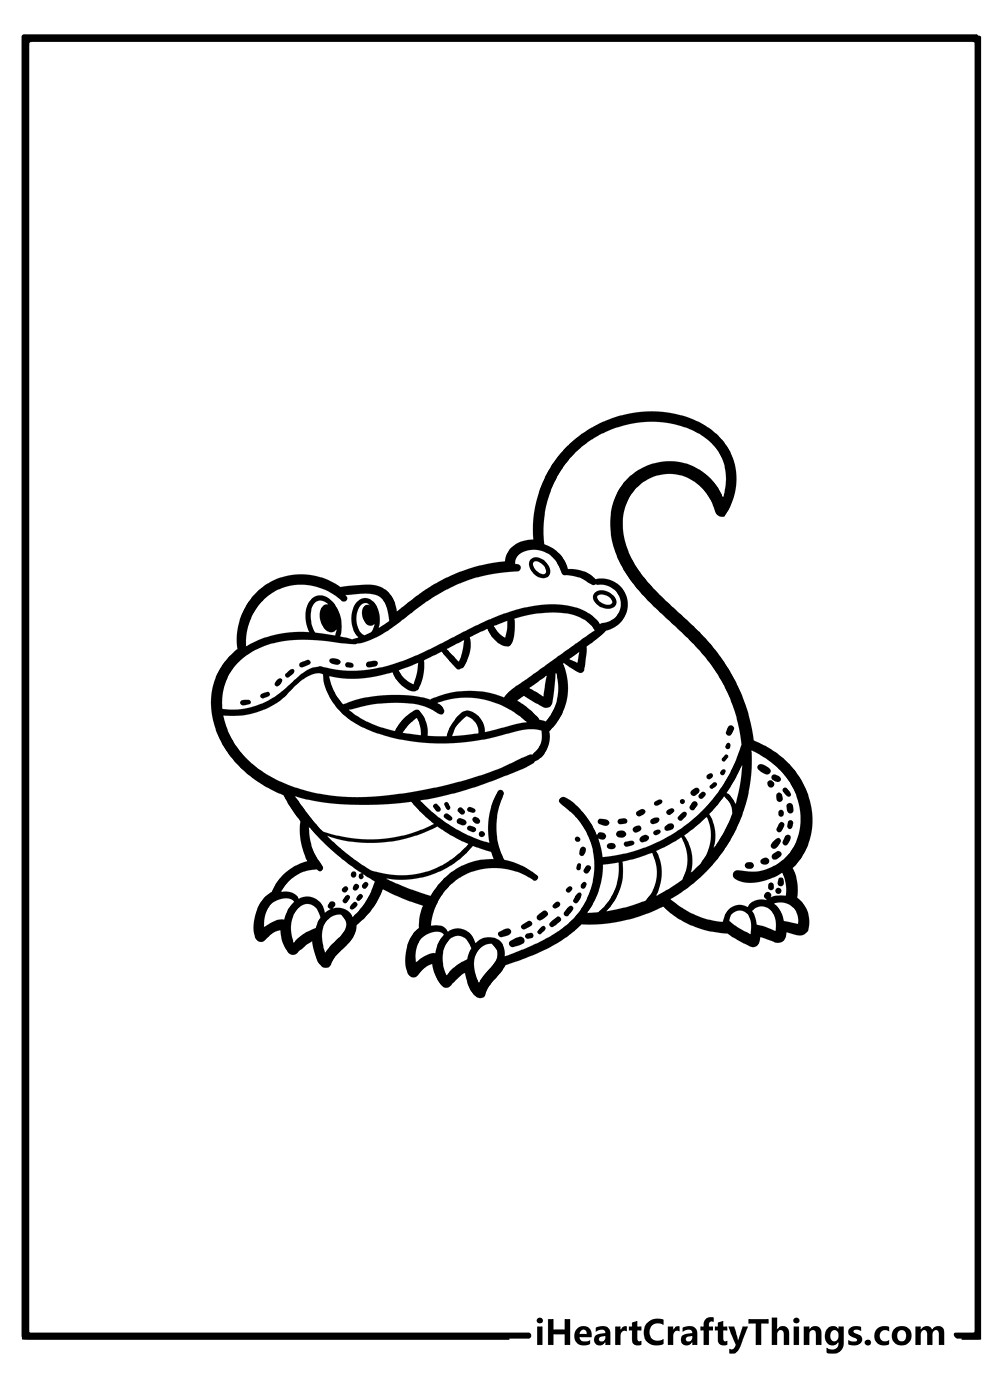 Crocodile Coloring Pages for preschoolers free printable